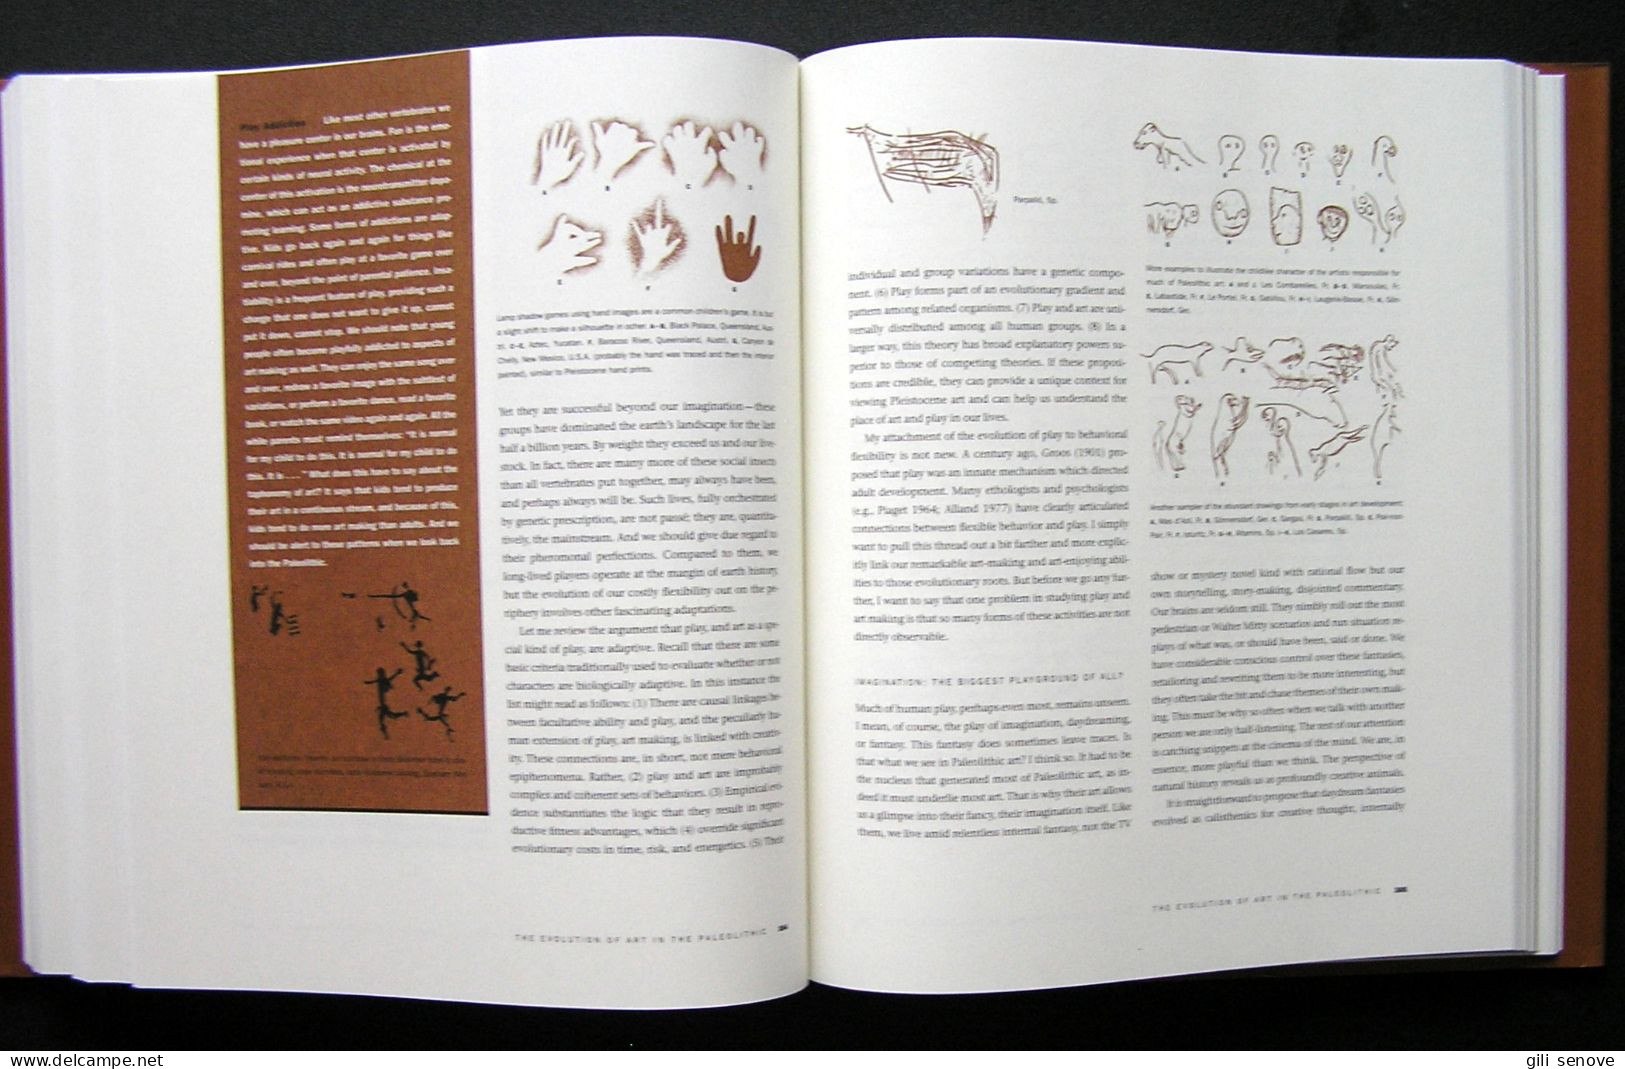 The Nature of Paleolithic Art by R. Dale Guthrie 2005